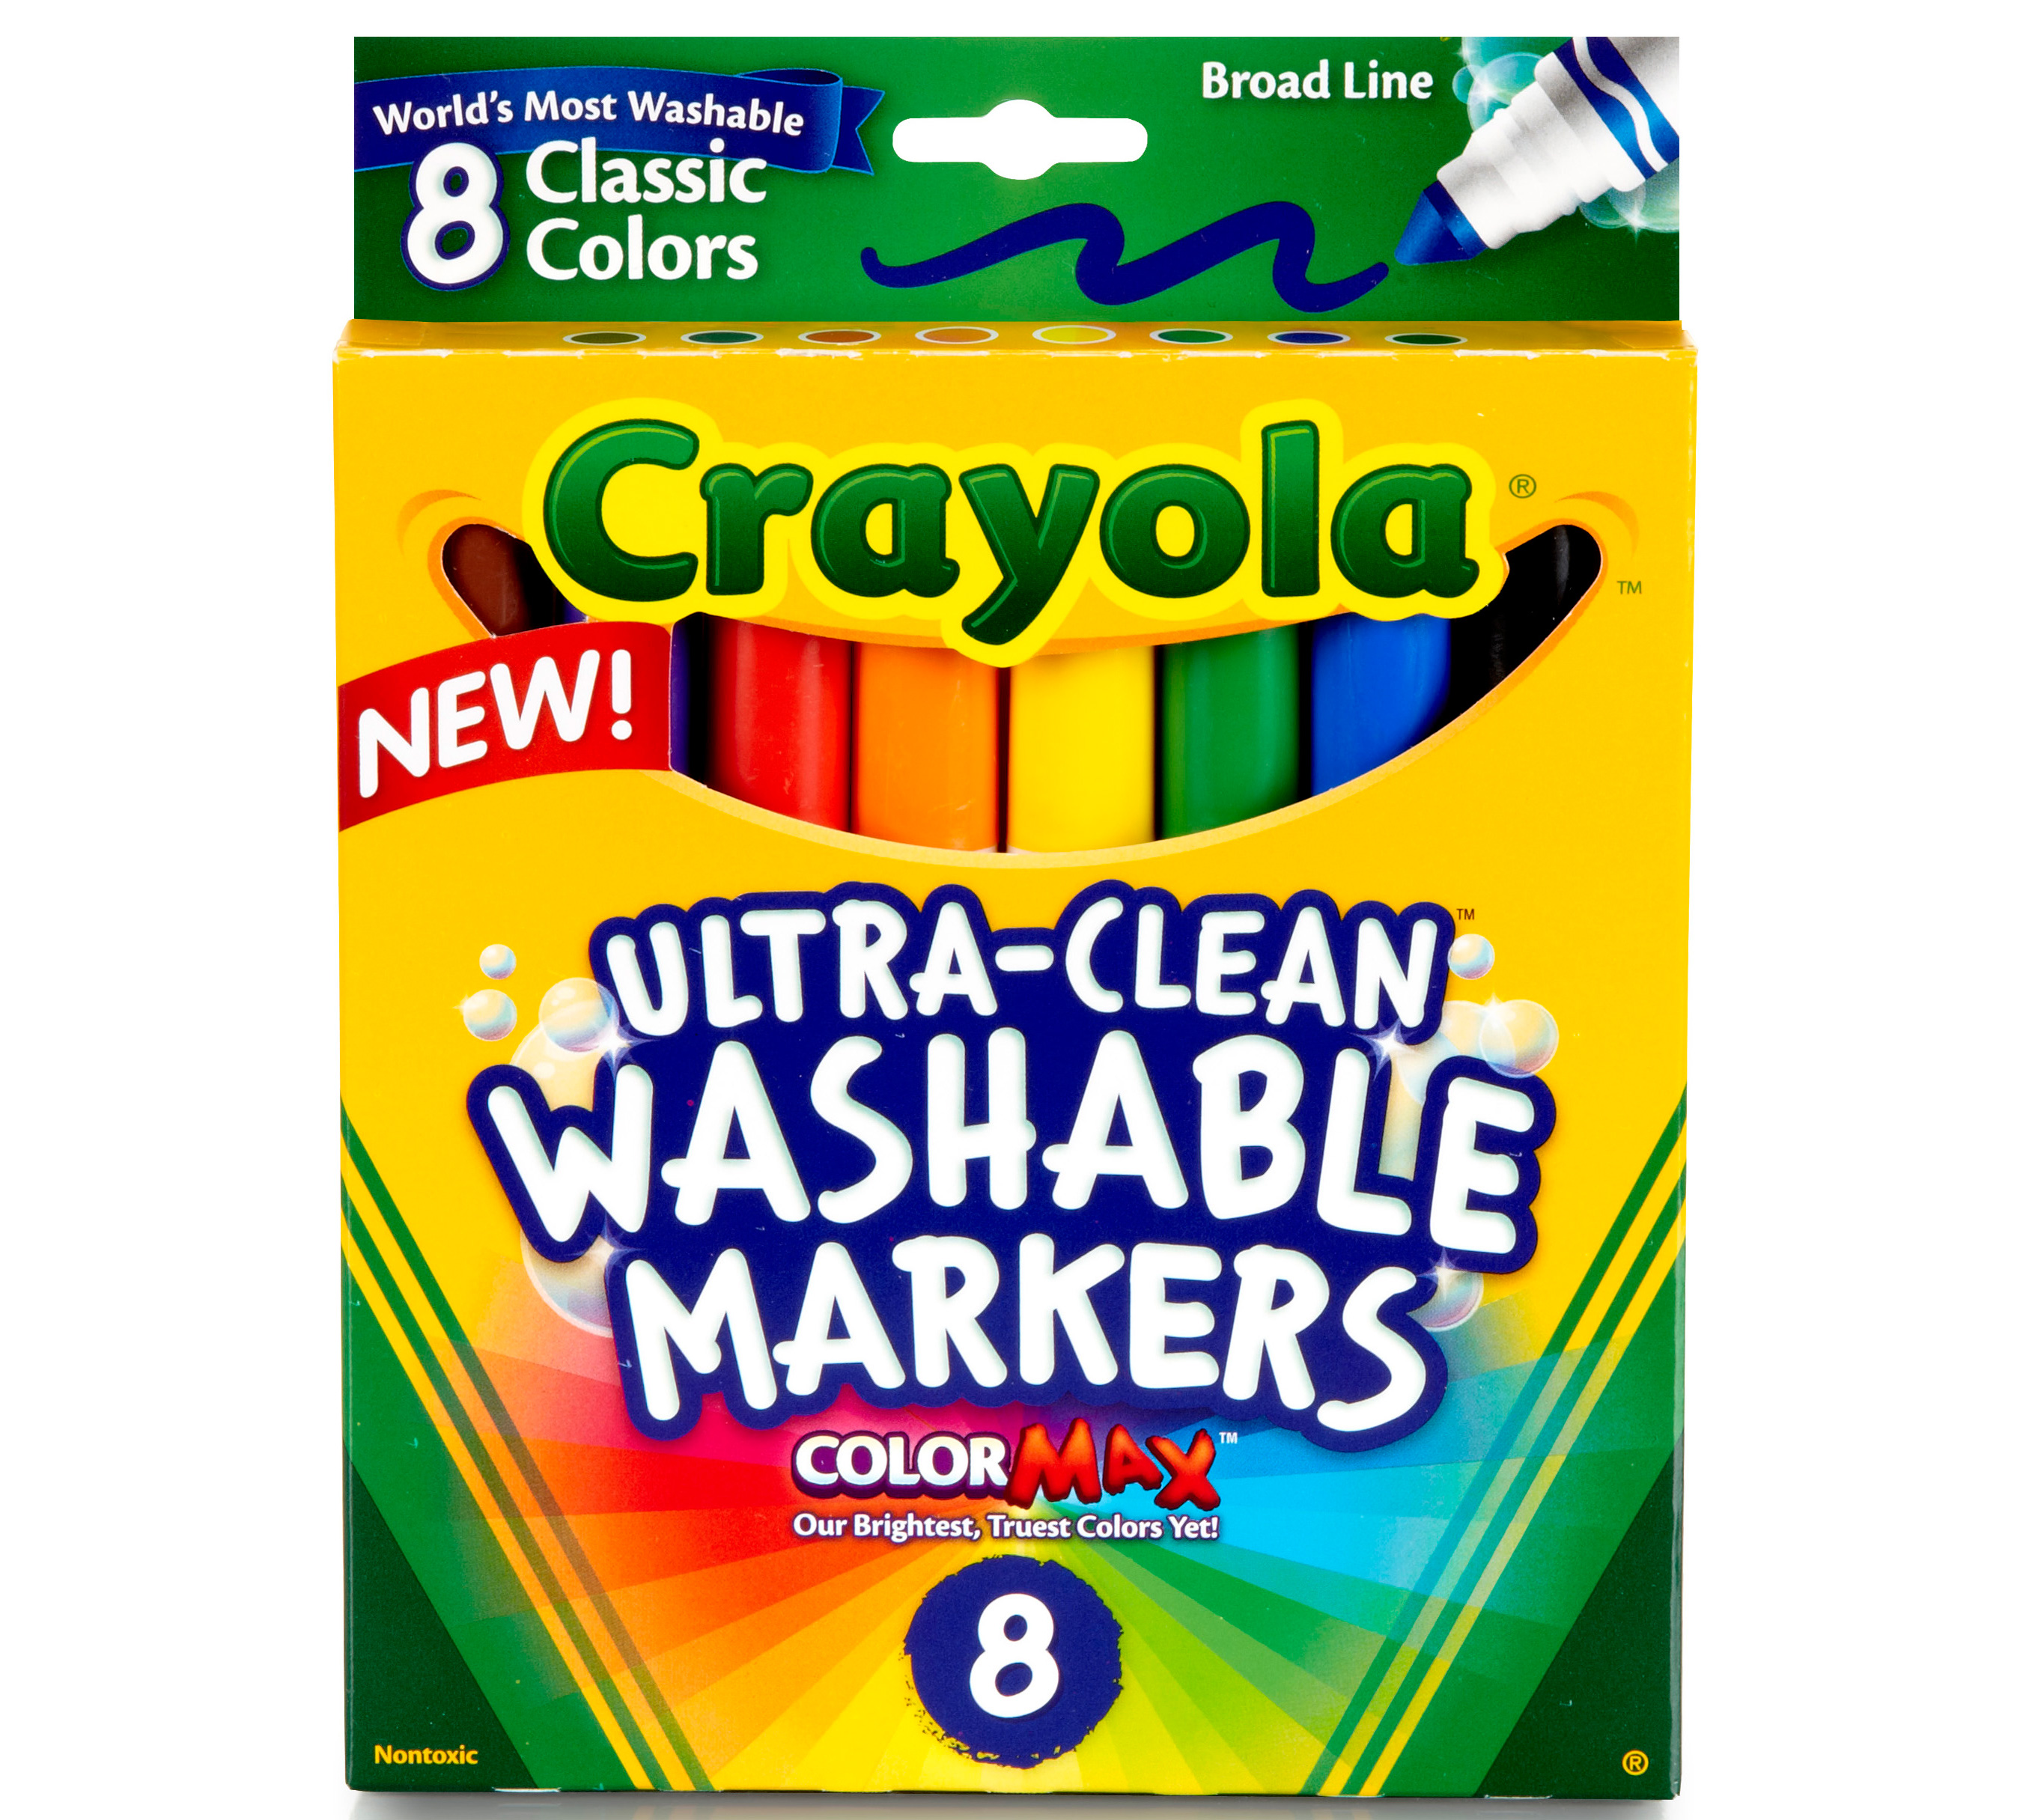 Ultra-Clean Washable Markers, Broad Line, 8 Ct.  Crayola